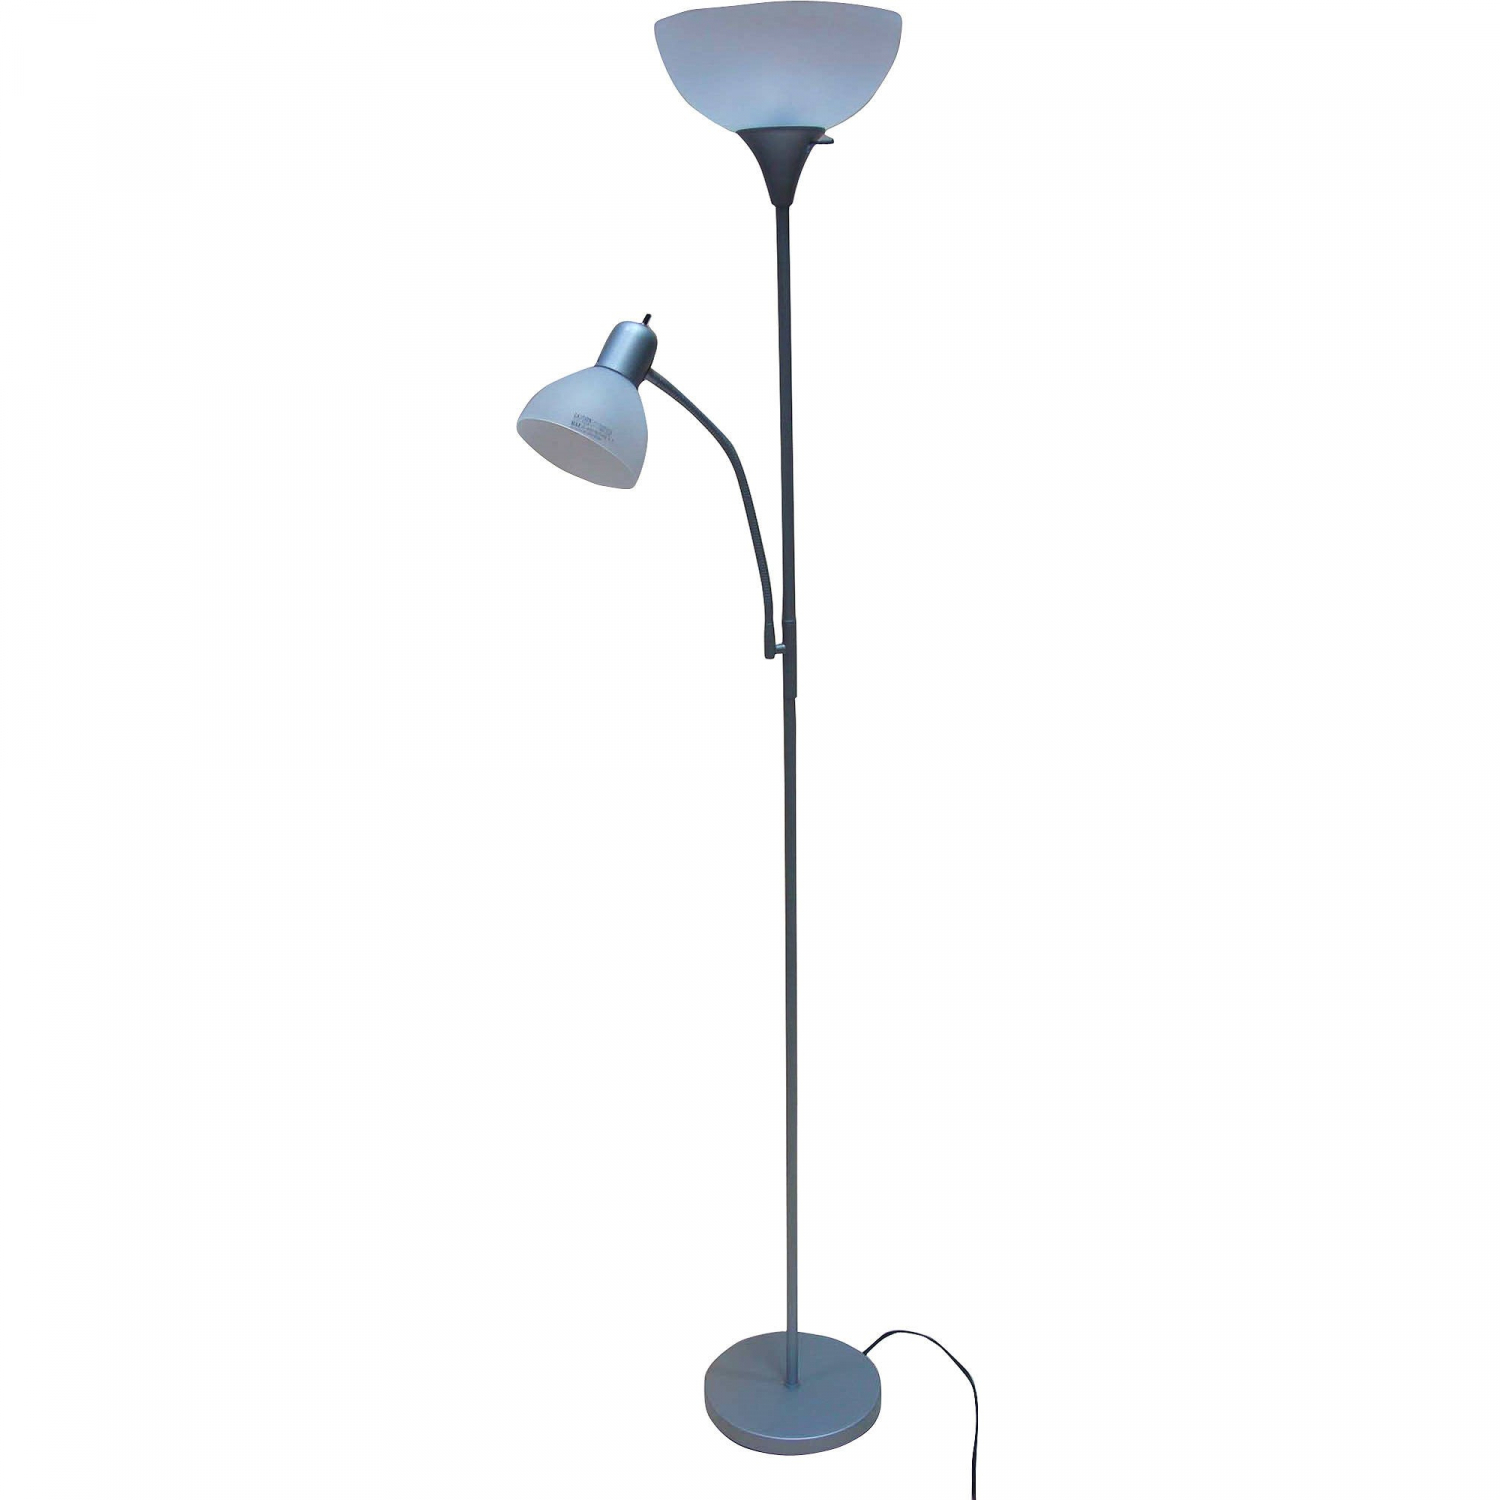 Details About Mainstays 72 Combo Floor Lamp within dimensions 1500 X 1500